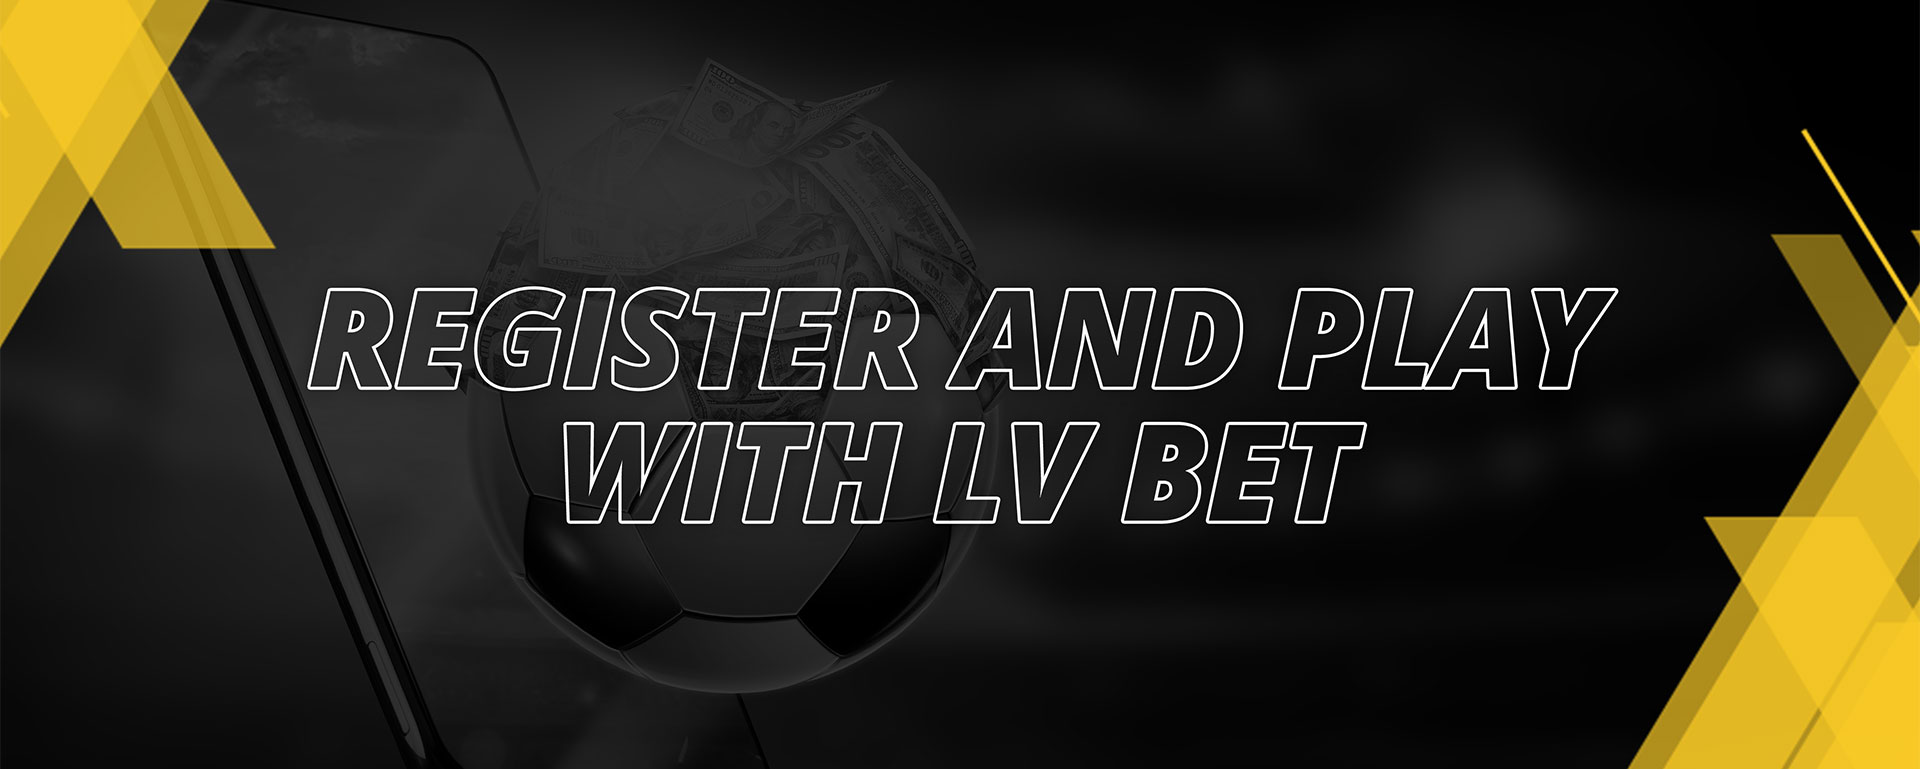 REGISTER AND PLAY WITH LV BET